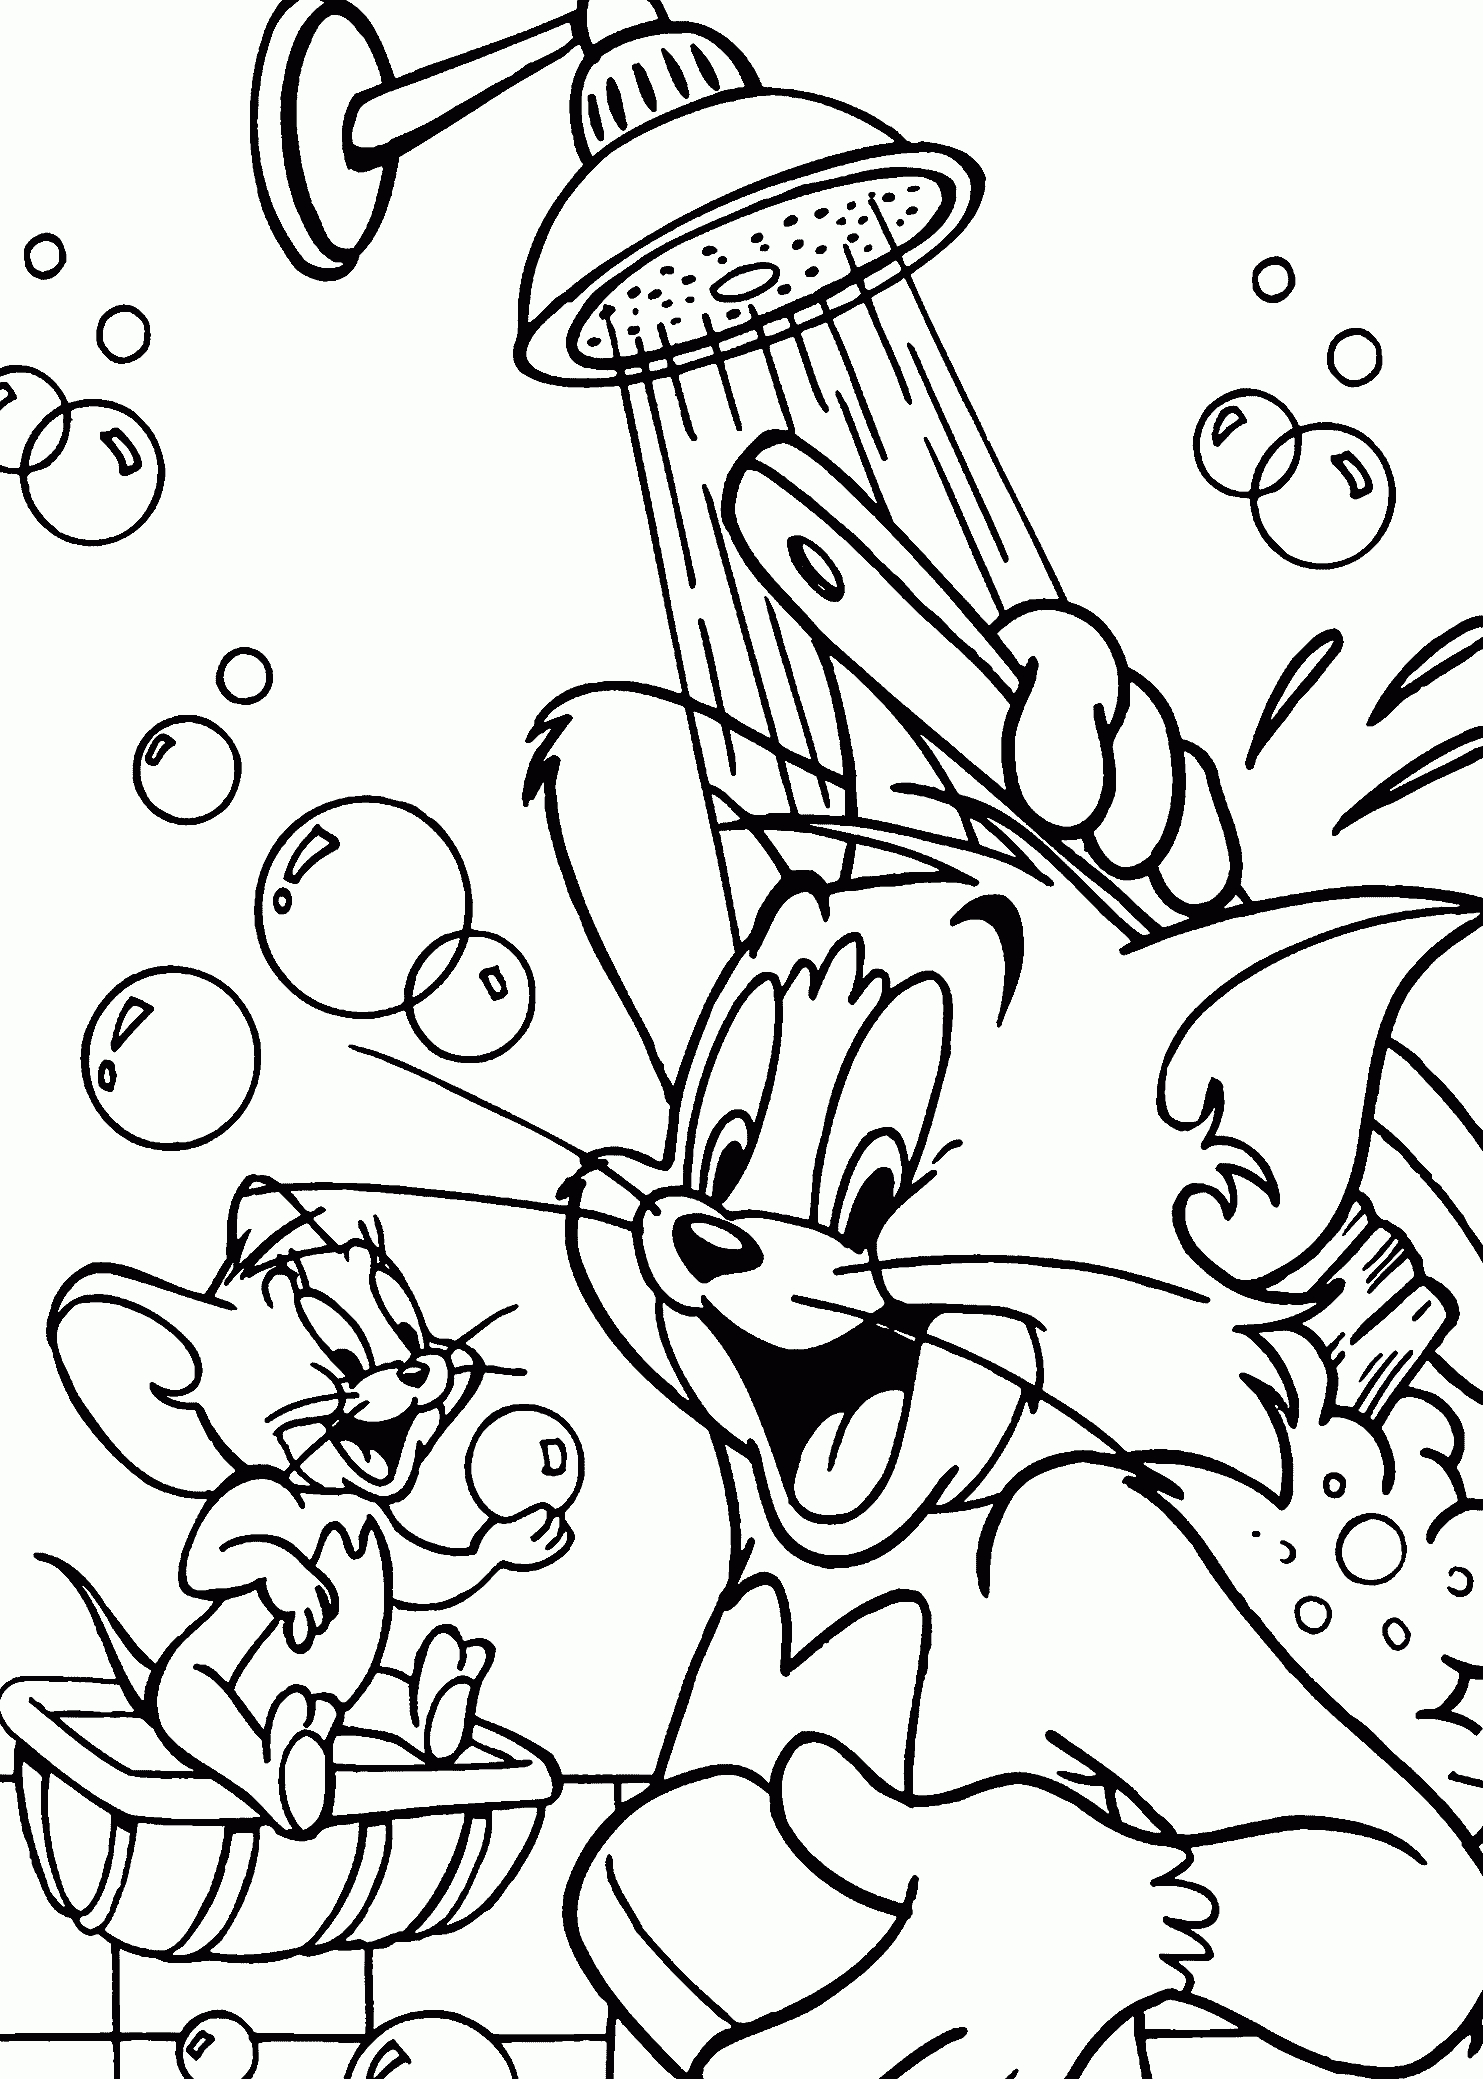 Tom And Jerry Shower Coloring Pages For Kids, Printable Free | Kids - Free Printable Tom And Jerry Coloring Pages